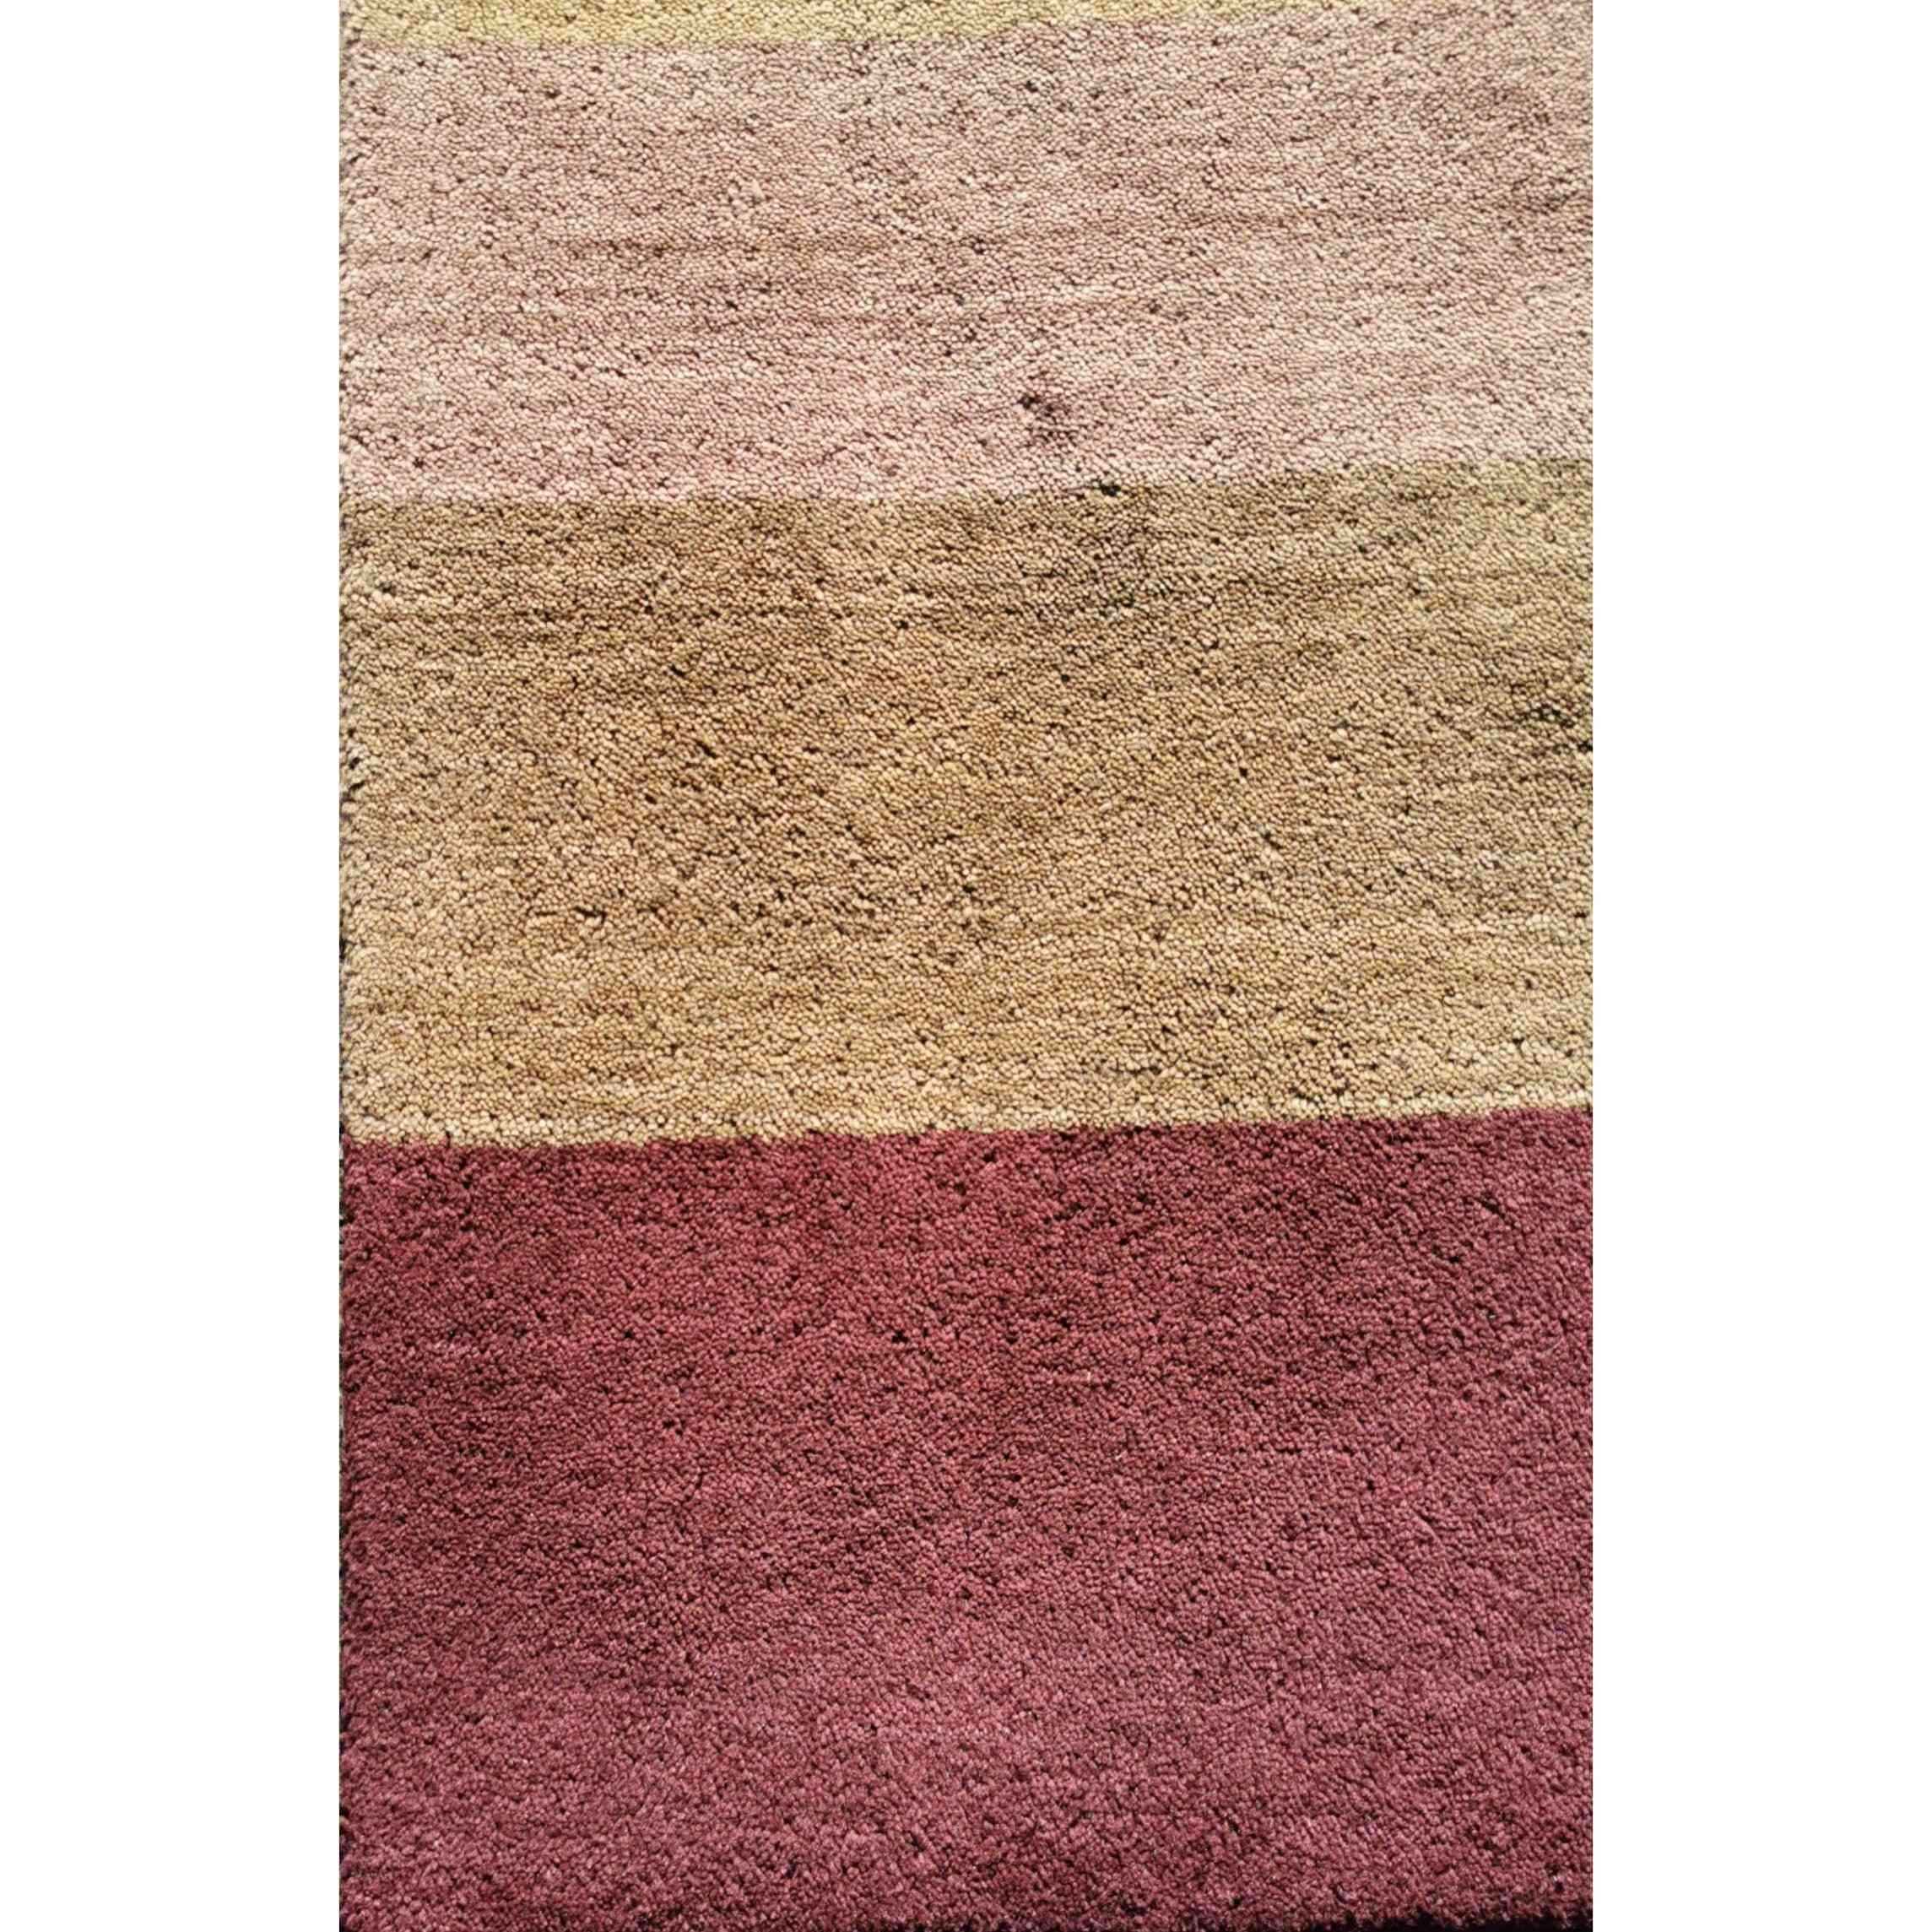 185 x 130 cm Contemporary Brown Rug - Rugmaster